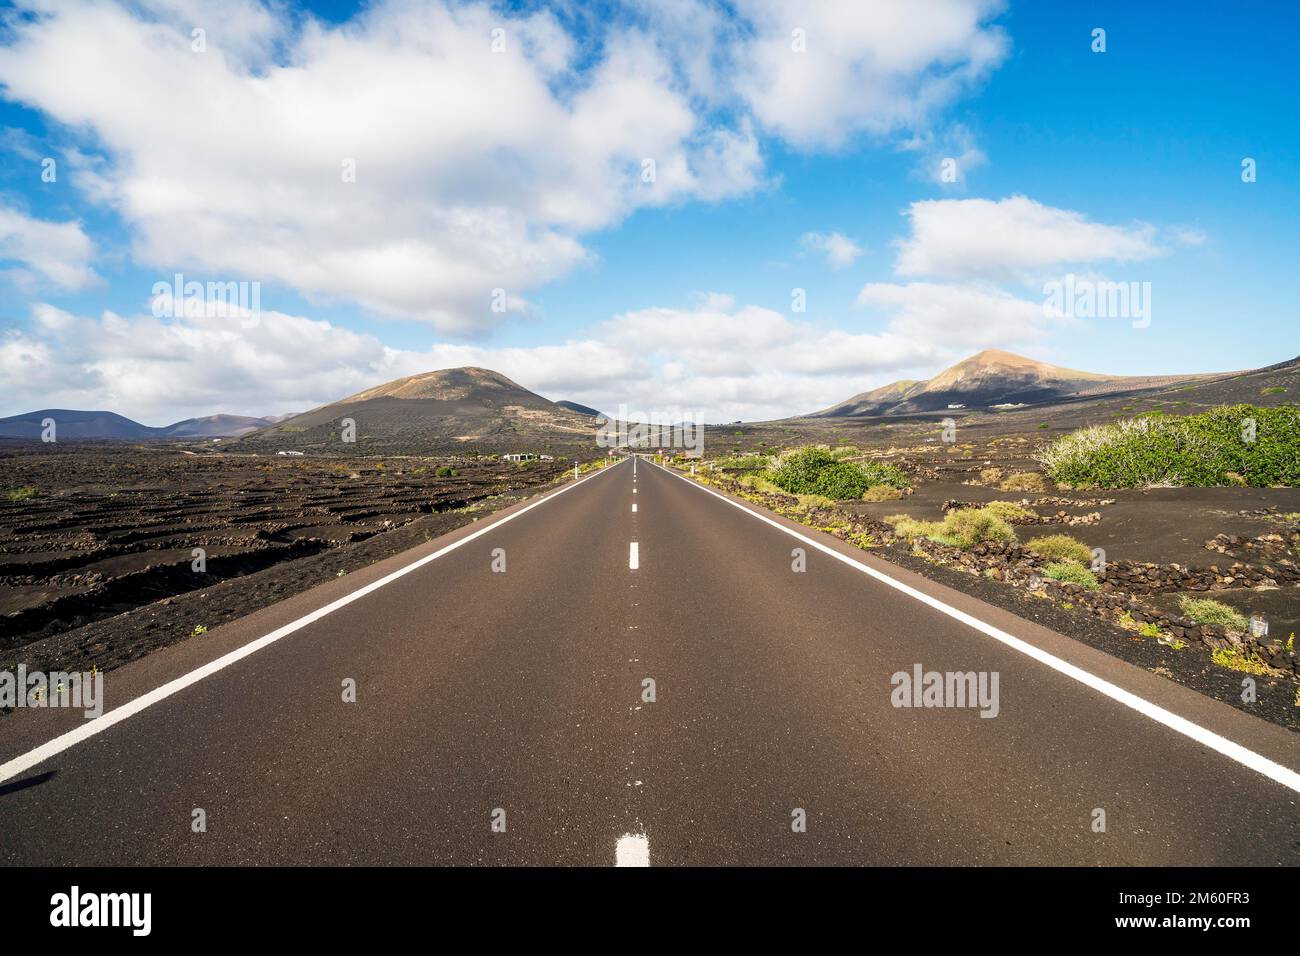 Landscape of inland Lanzarote, road through vineyards and volcanoes, Canary Islands, Spain Stock Photo